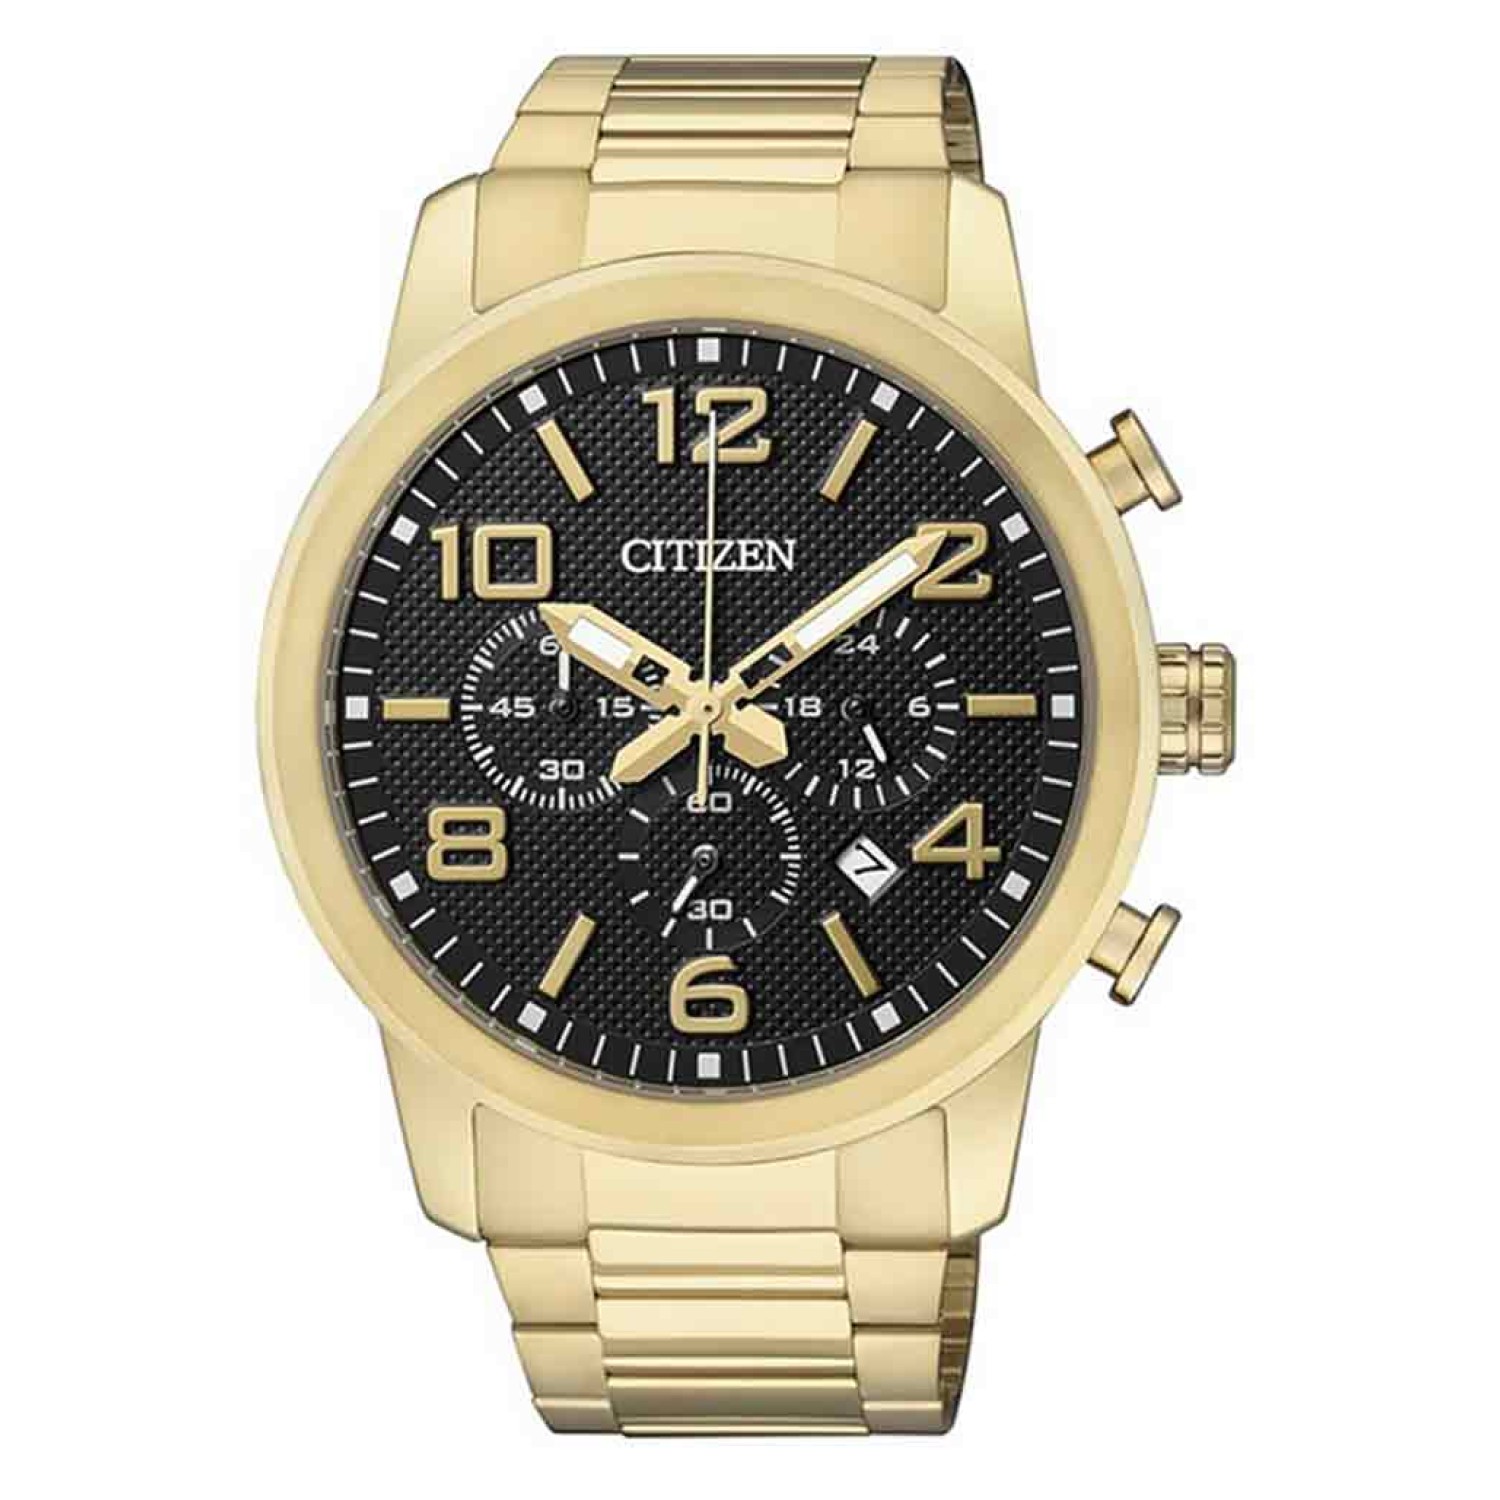 AN8052-55E Citizen Mens Chronograph Stainless Steel WR100 Watch. This Citizen Men’s Watch From the Chronograph Collection Features A Textured Black Face And Prominent Gold-Toned Details Accentuated By The Durable, Gold-Toned Stainless Steel Casing And Bra